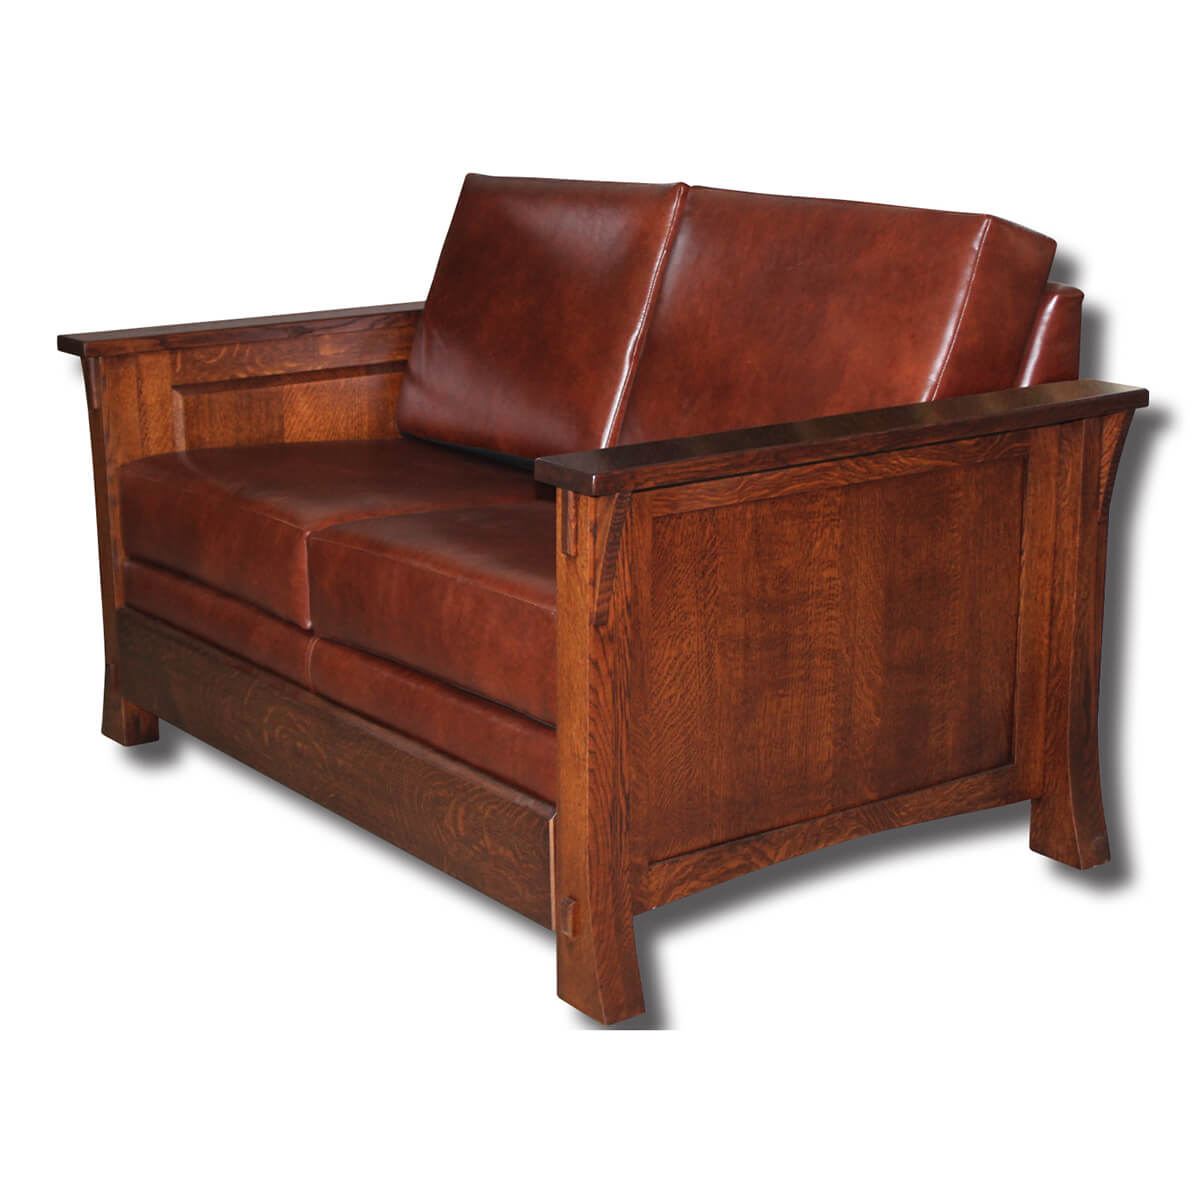 Read more about the article Dutch Love Seat